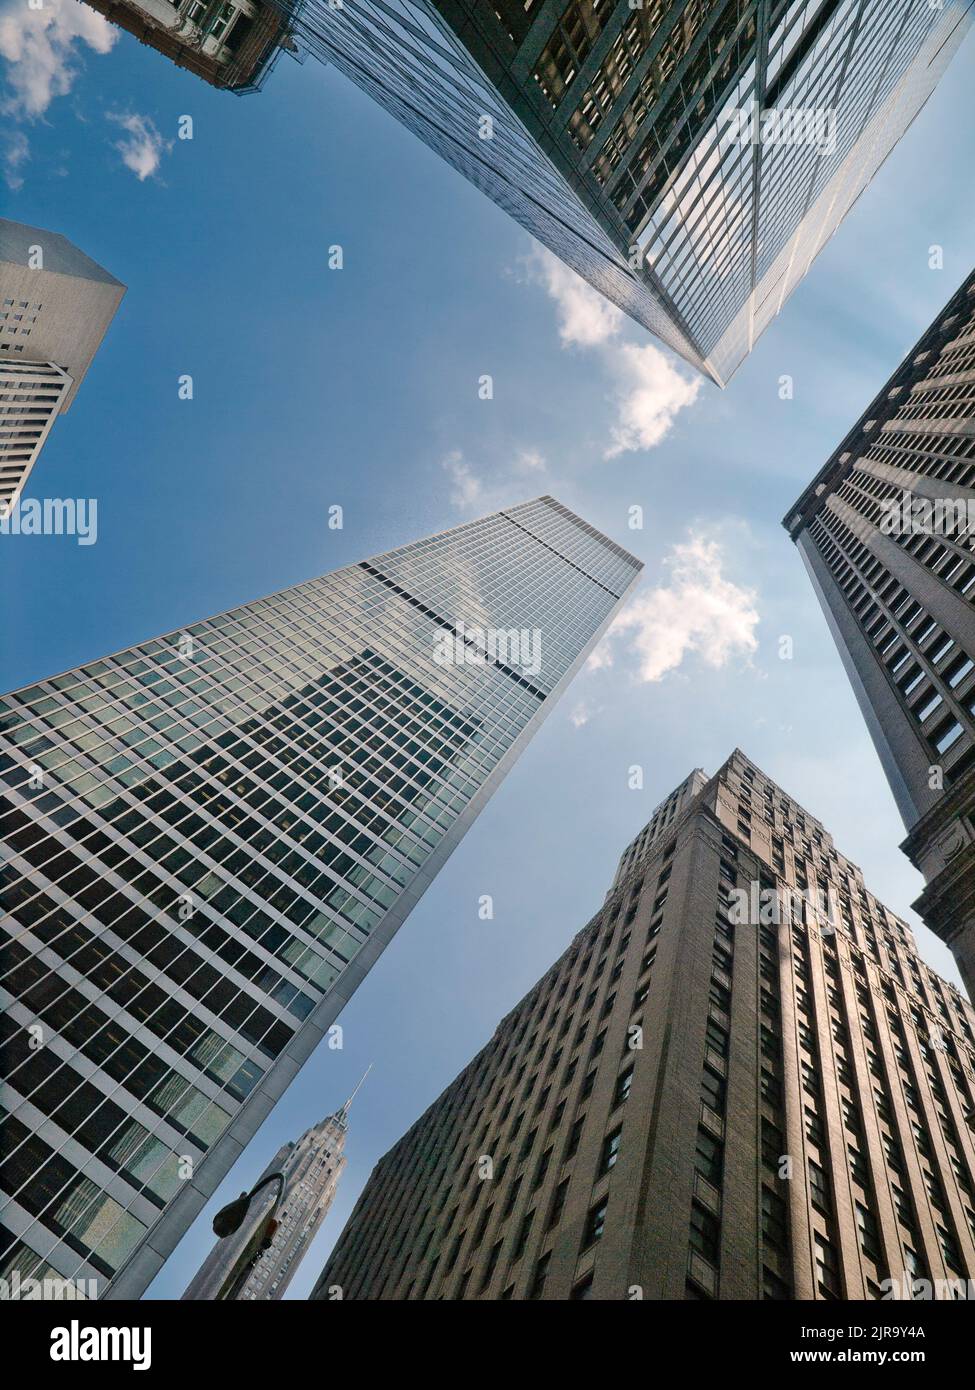 City skyscrapers view from below in New York City, Manhattan, USA Stock Photo